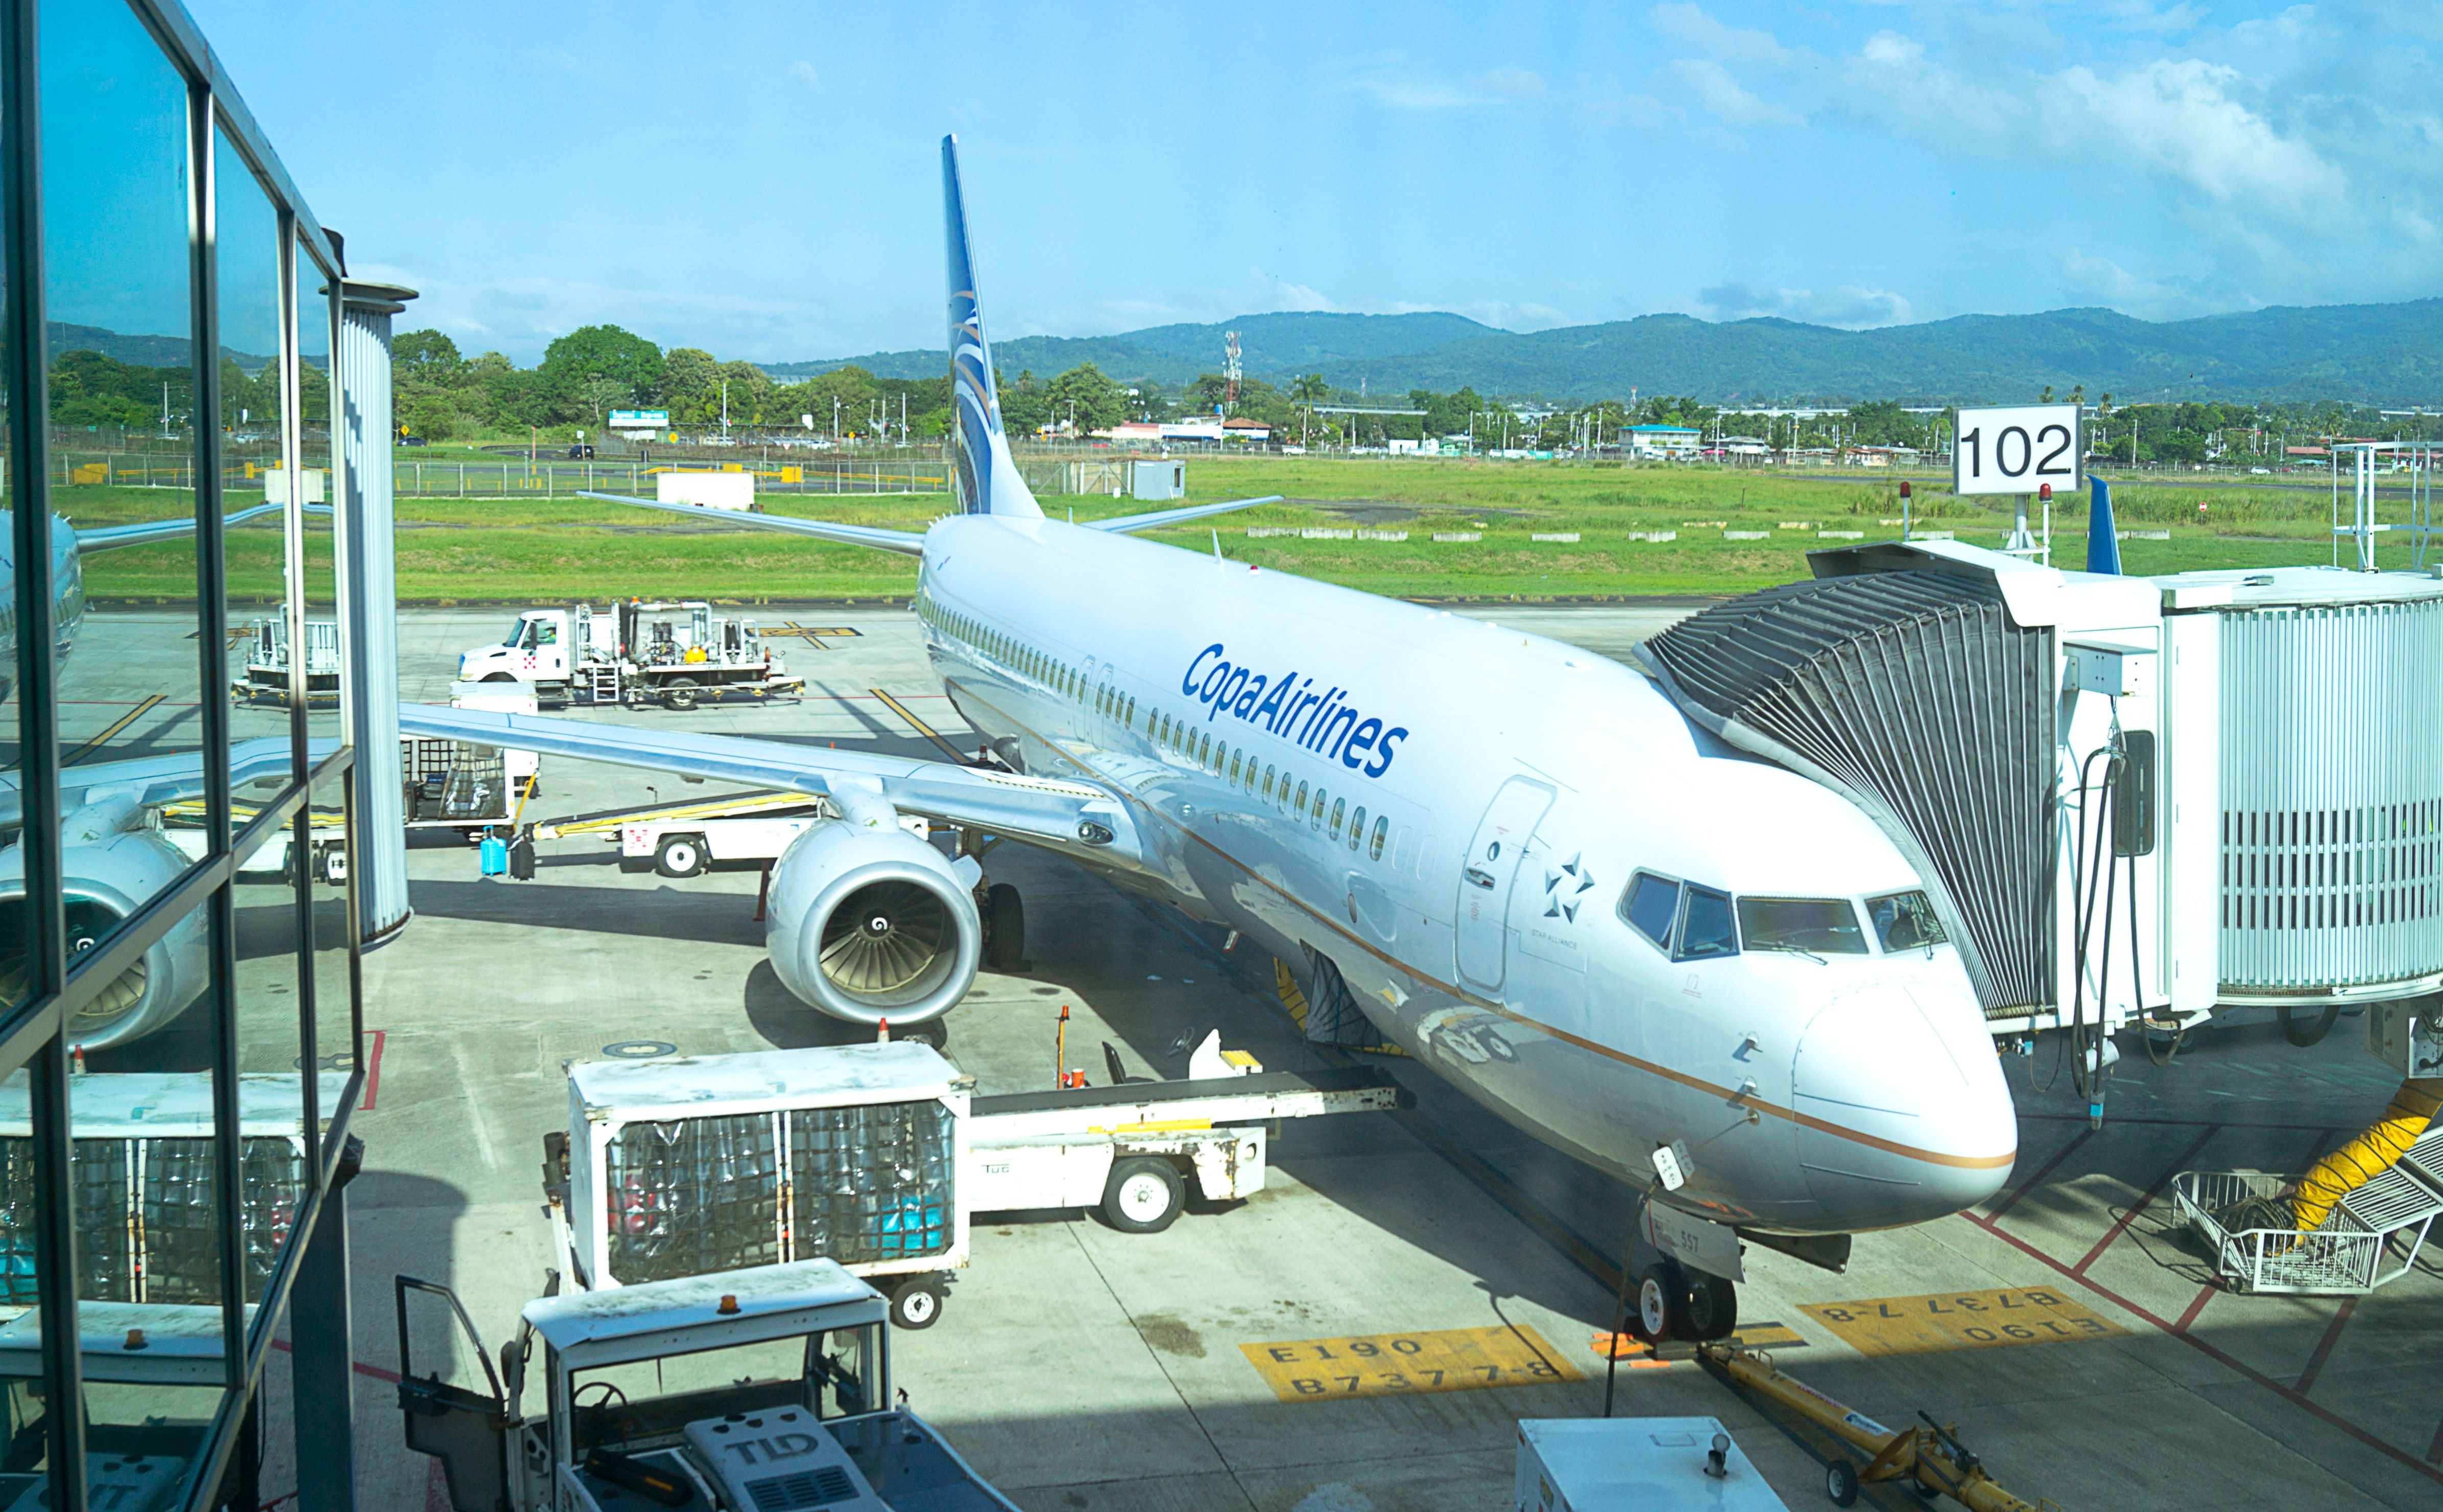 A Copa Airlines aircraft on an airport apron parked at a gate.